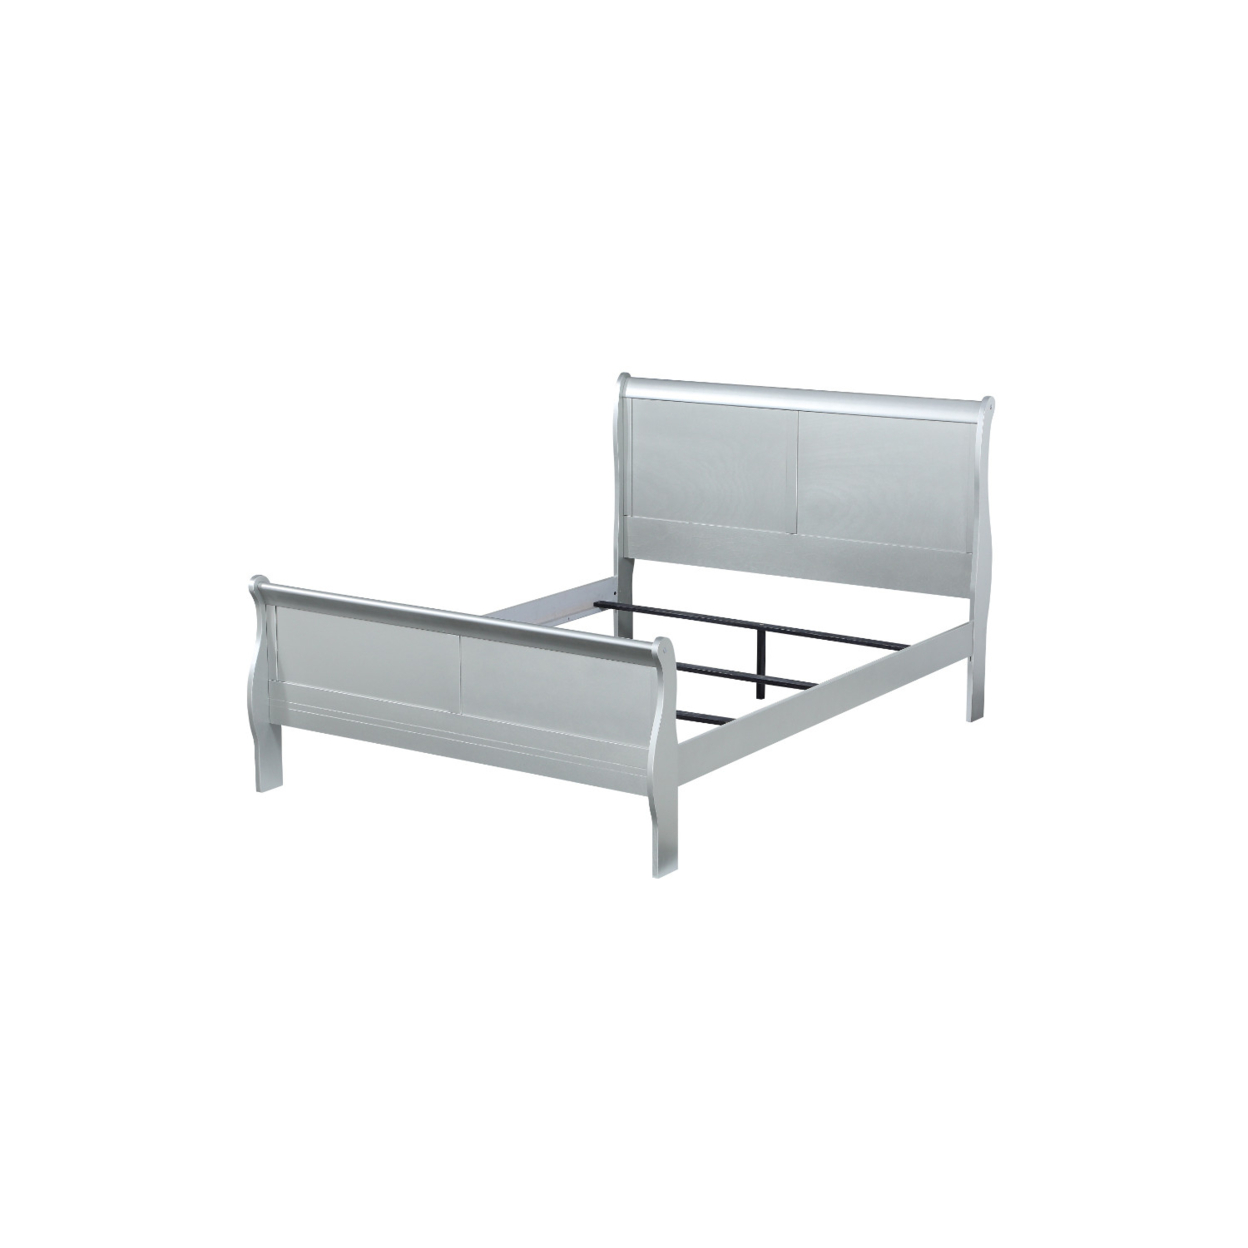 Wooden Queen Size Bed With Sleigh Headboard And Footboard, Silver- Saltoro Sherpi